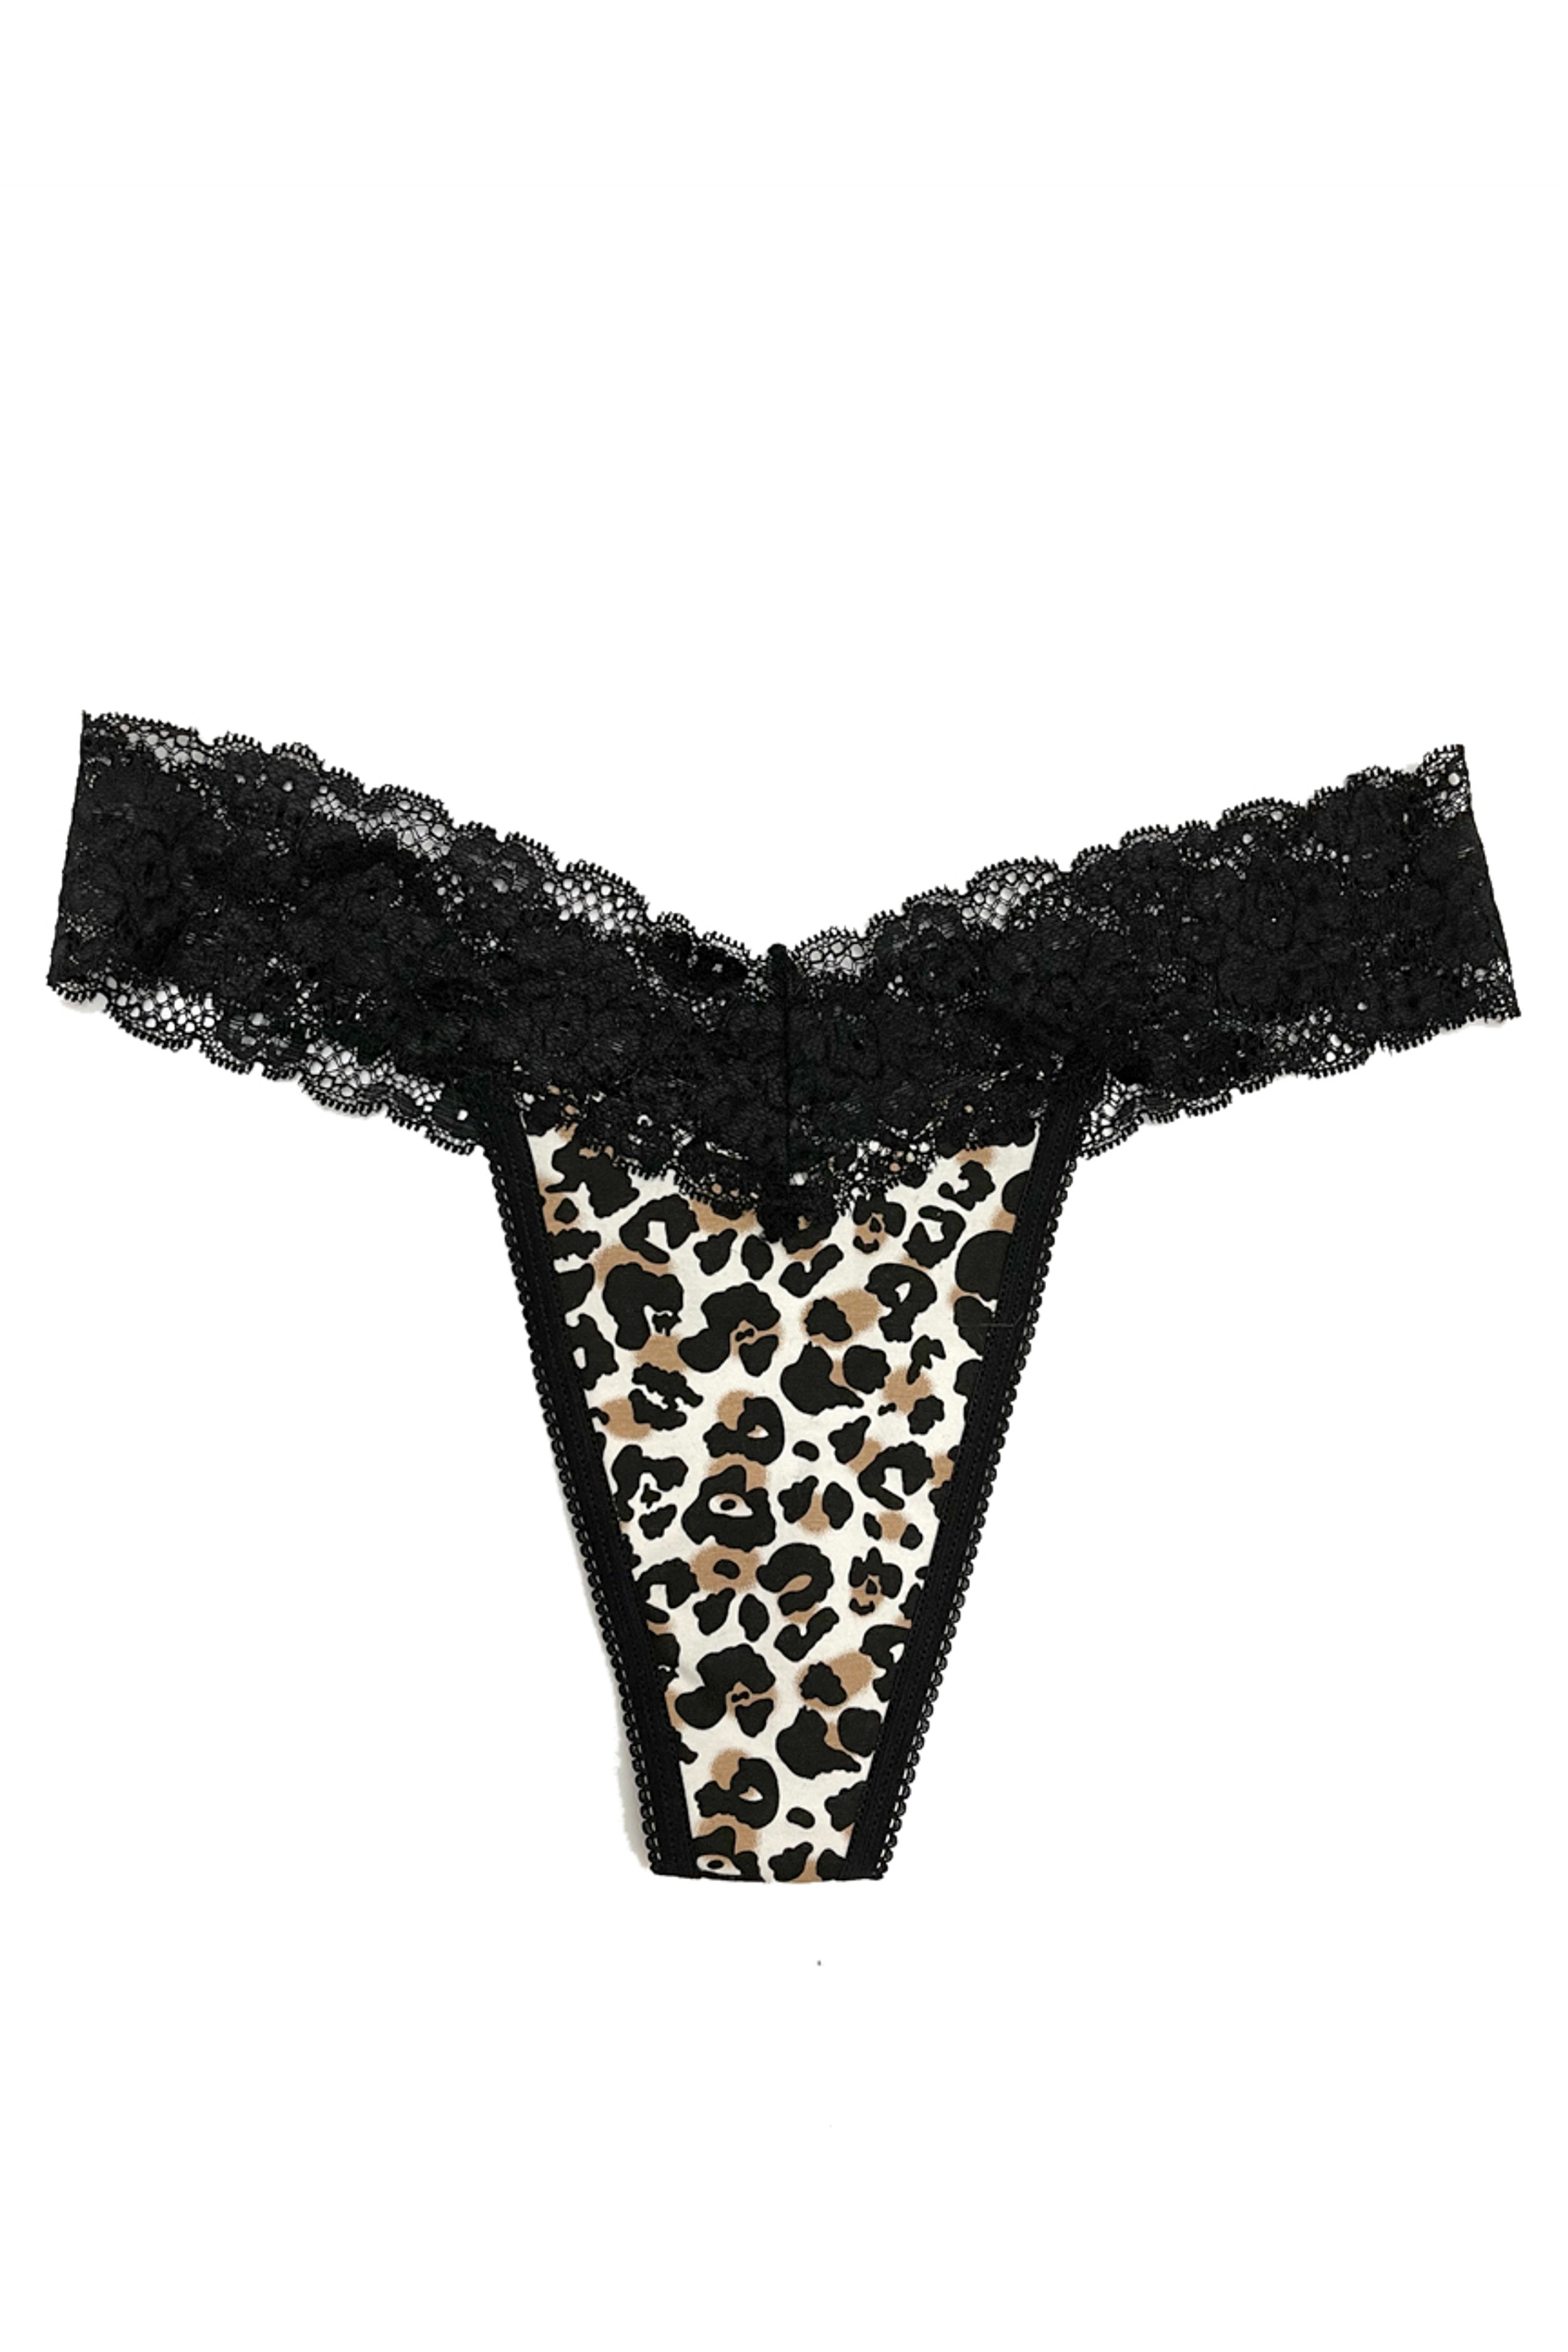 Vera Classic Lace Thong Panty - Shop Sexy Panties at Lucky Doll Lingerie PH